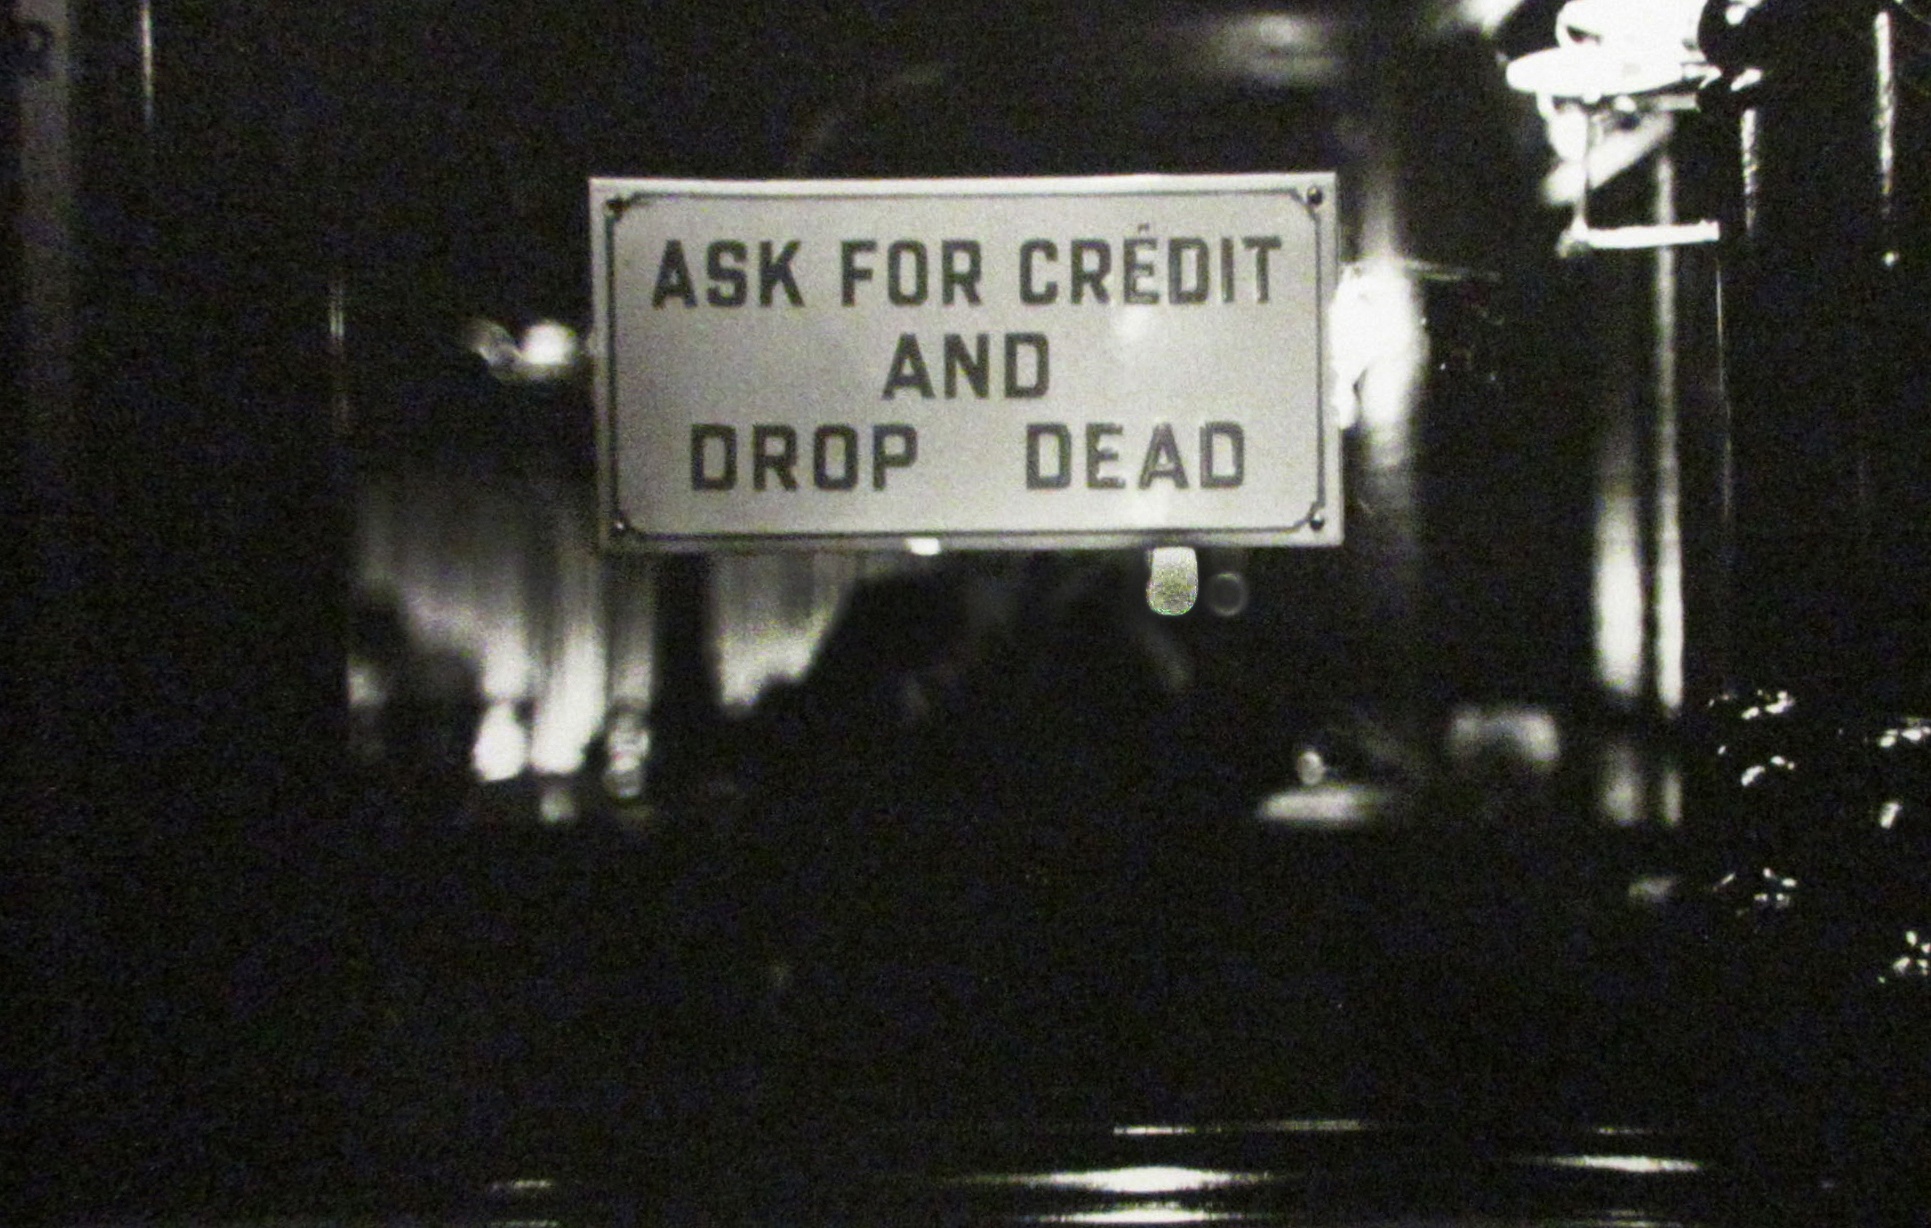 Black and white photograph of sign that reads “ASK FOR CREDIT AND DROP DEAD”